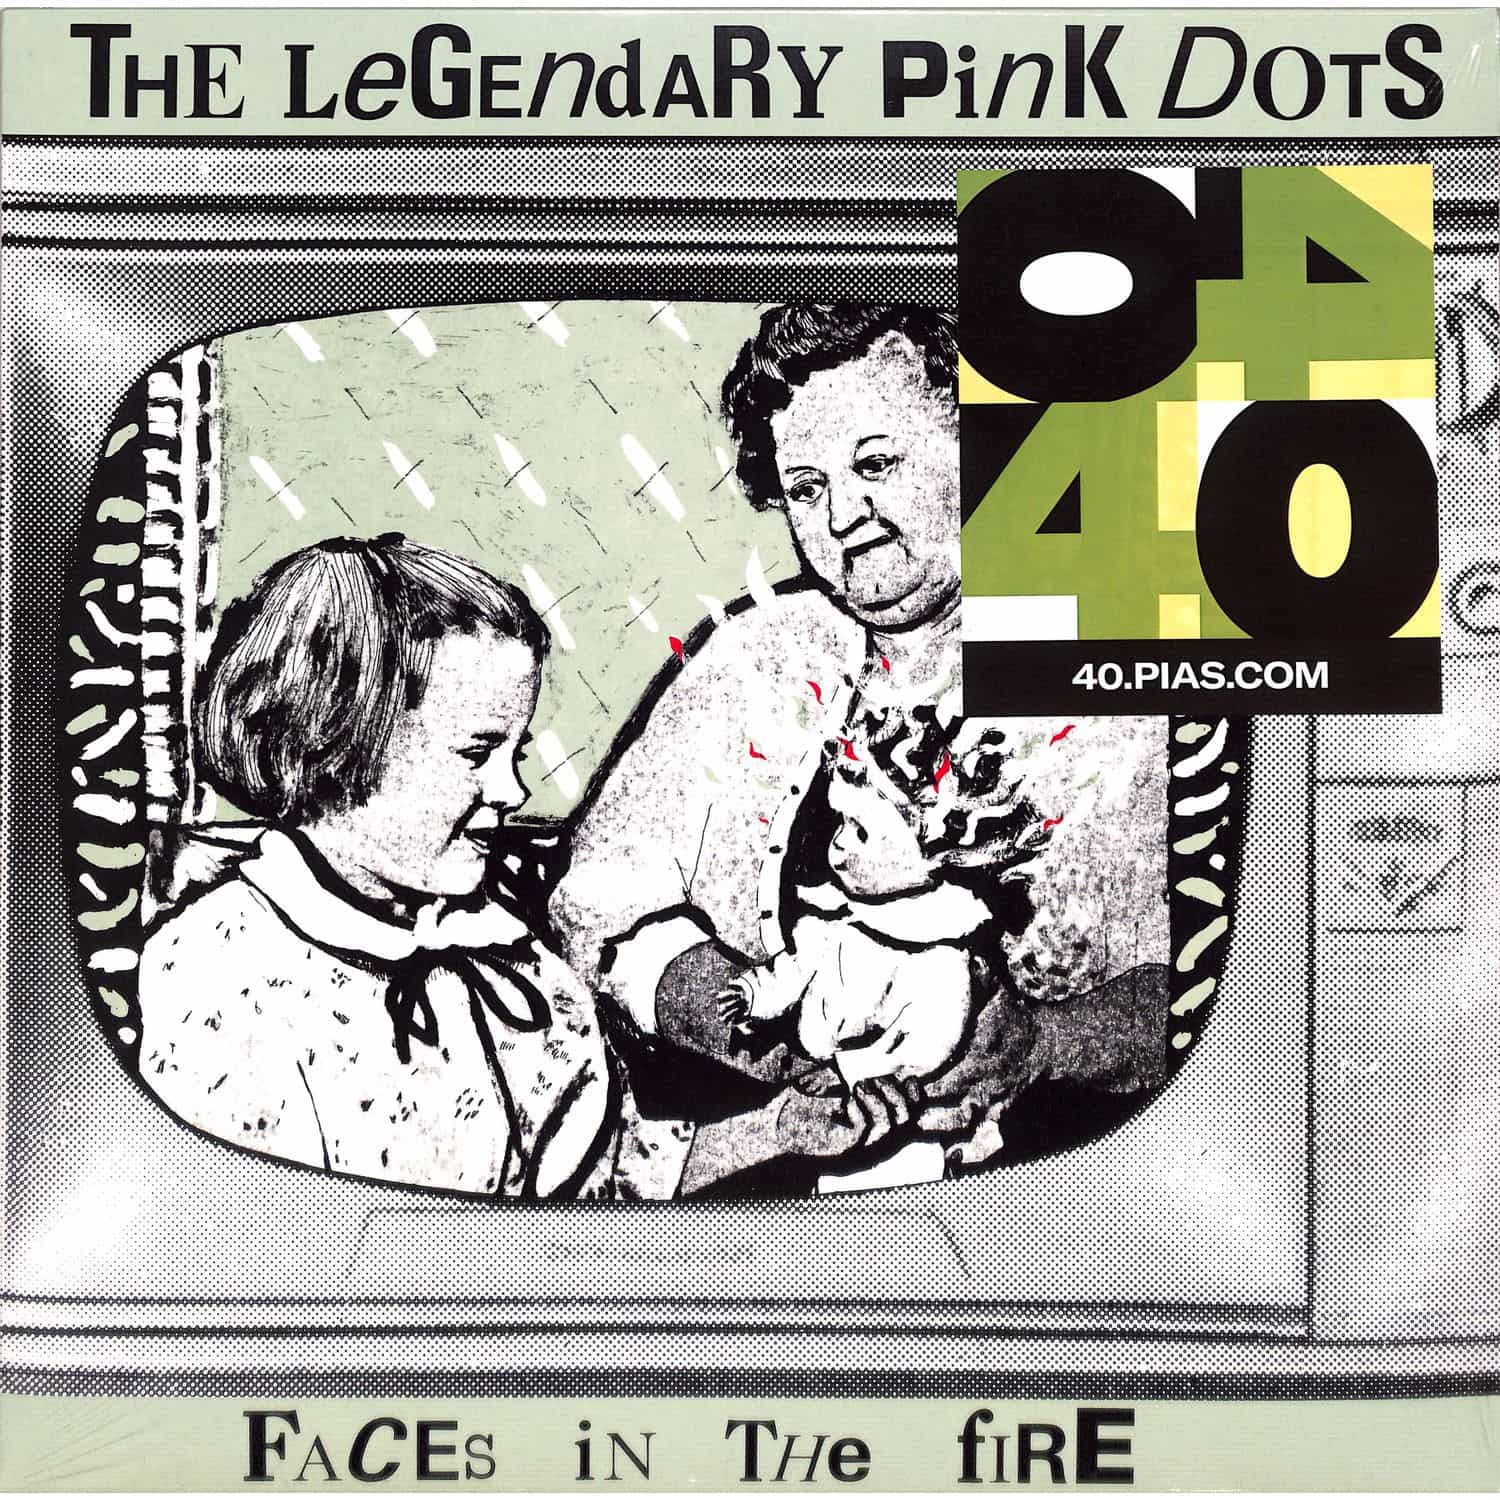 The Legendary Pink Dots - FACES IN THE FIRE 